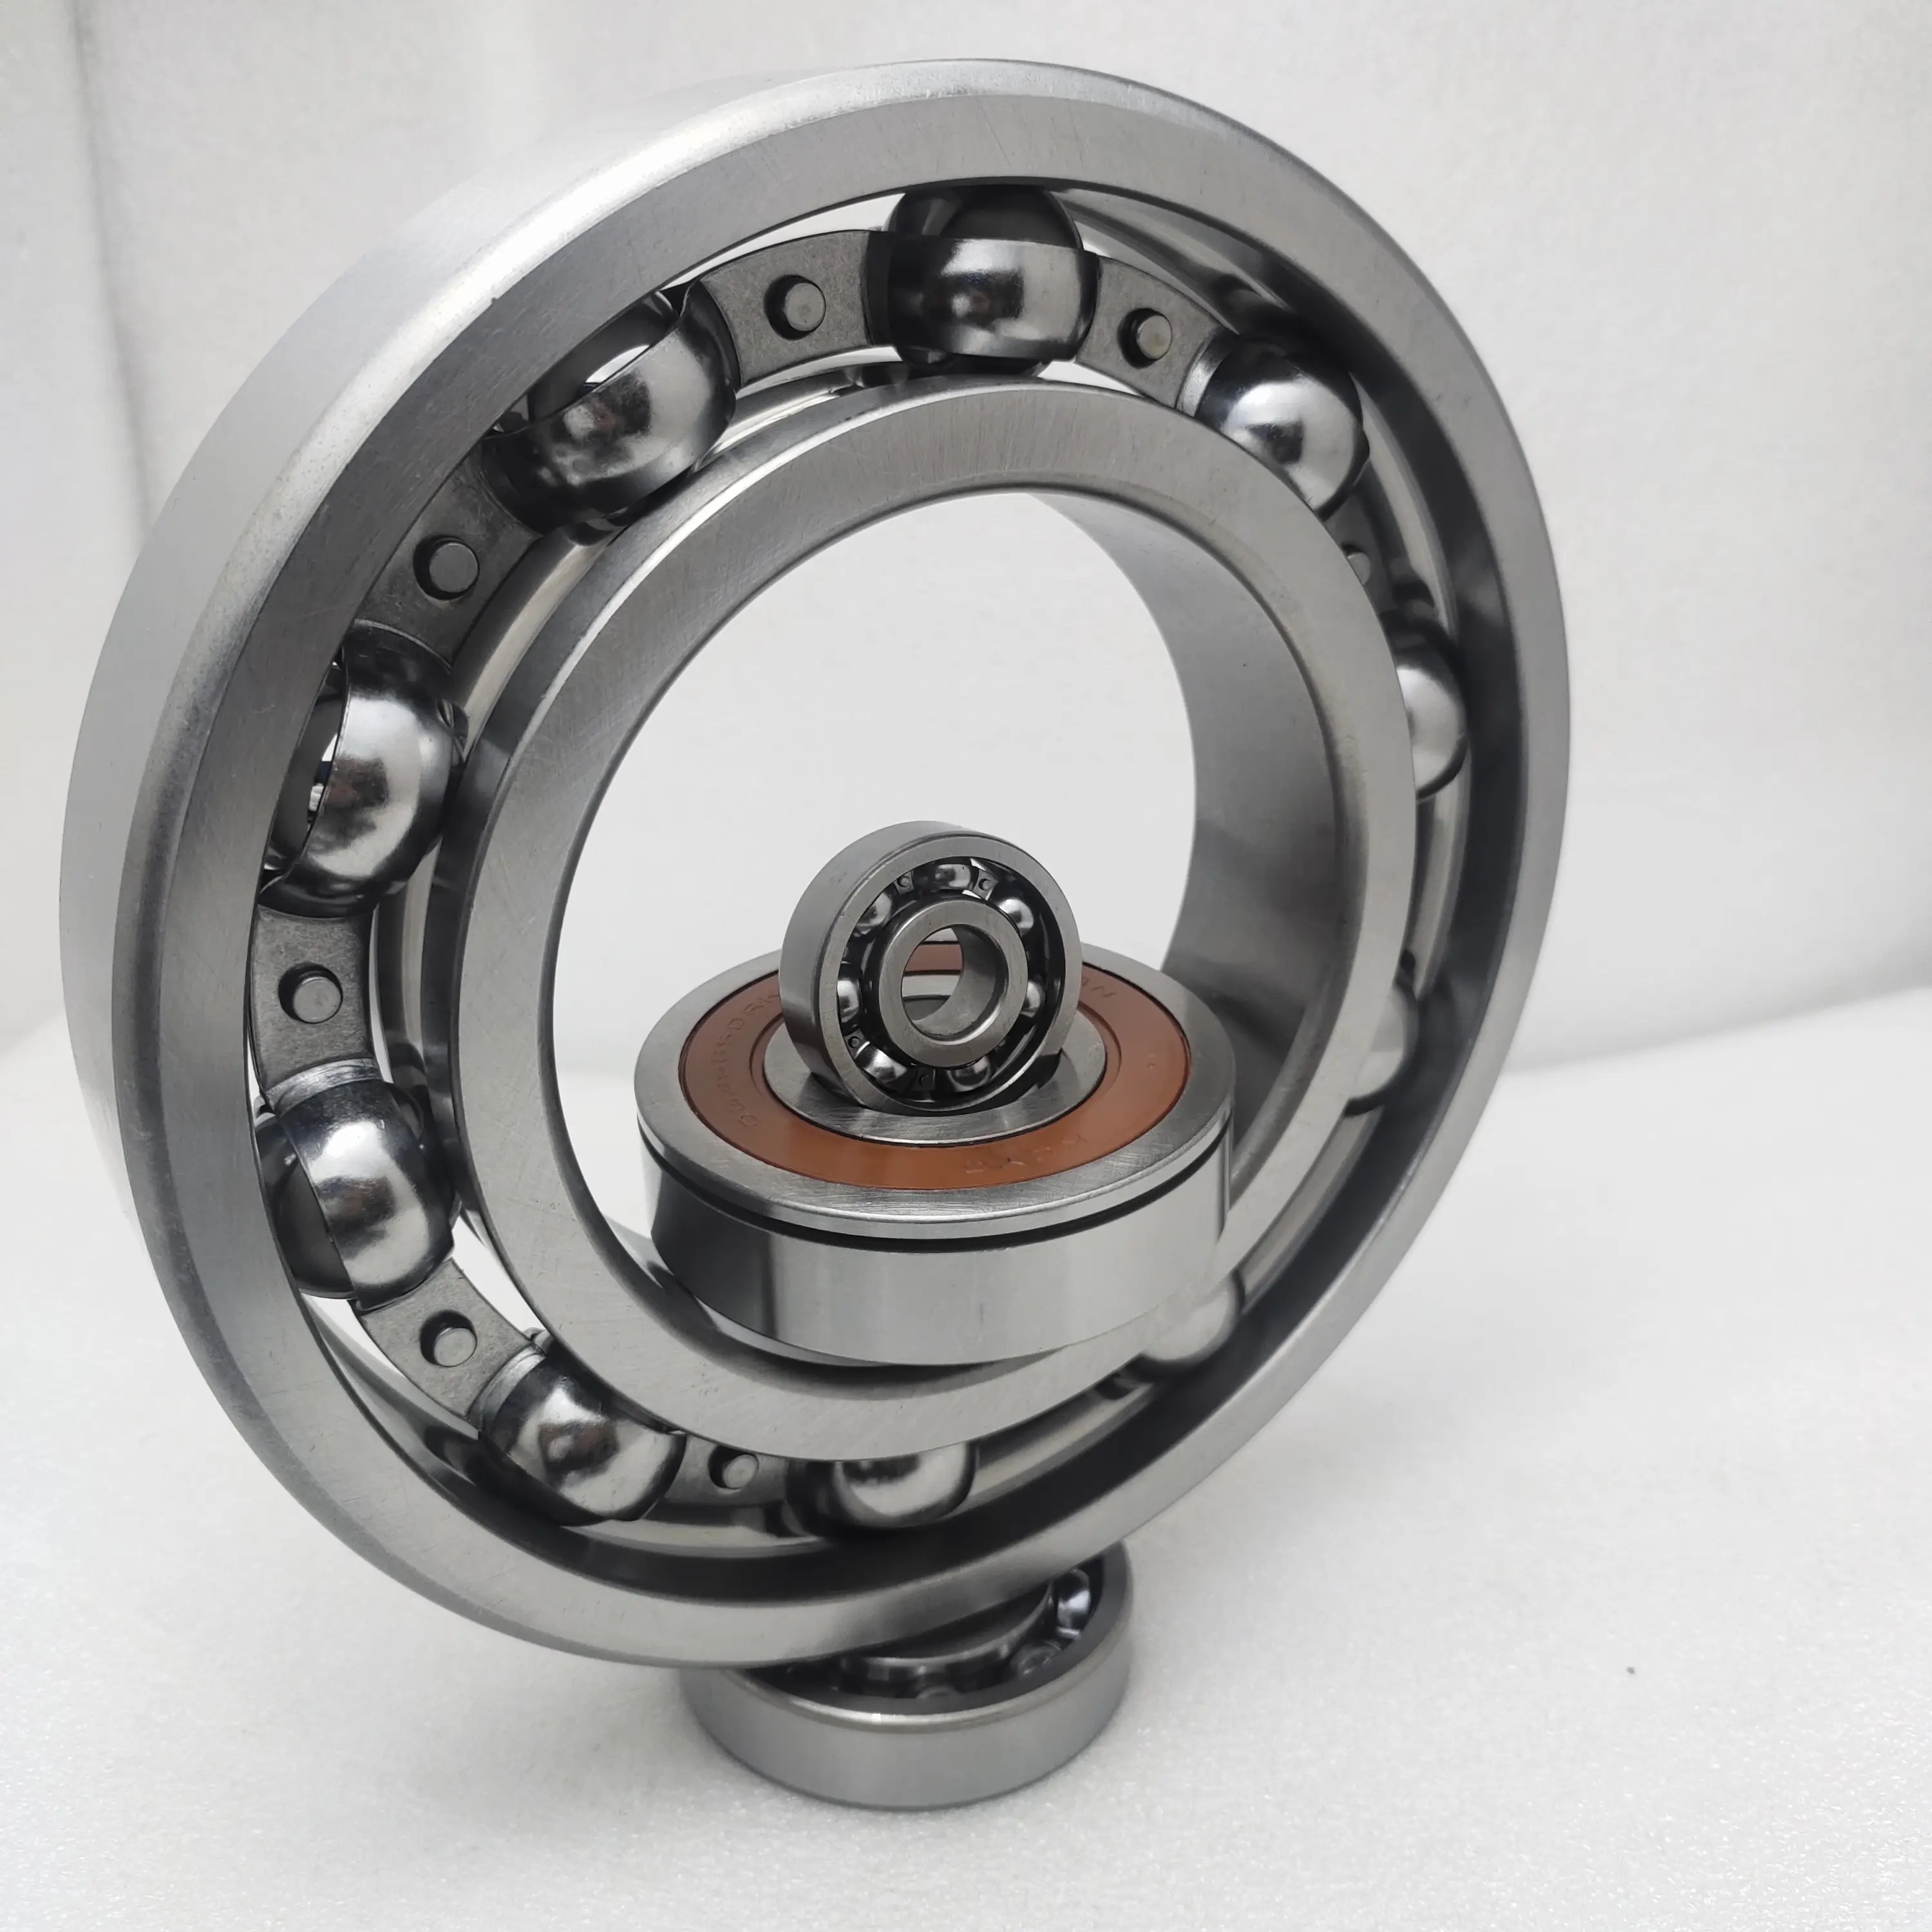 Chinese Factory Direct Selling Deep Groove Ball Bearing 6303zz 6303-2rs Z Size 17 * 47 * 14mm 6303 Motorcycle Bearing